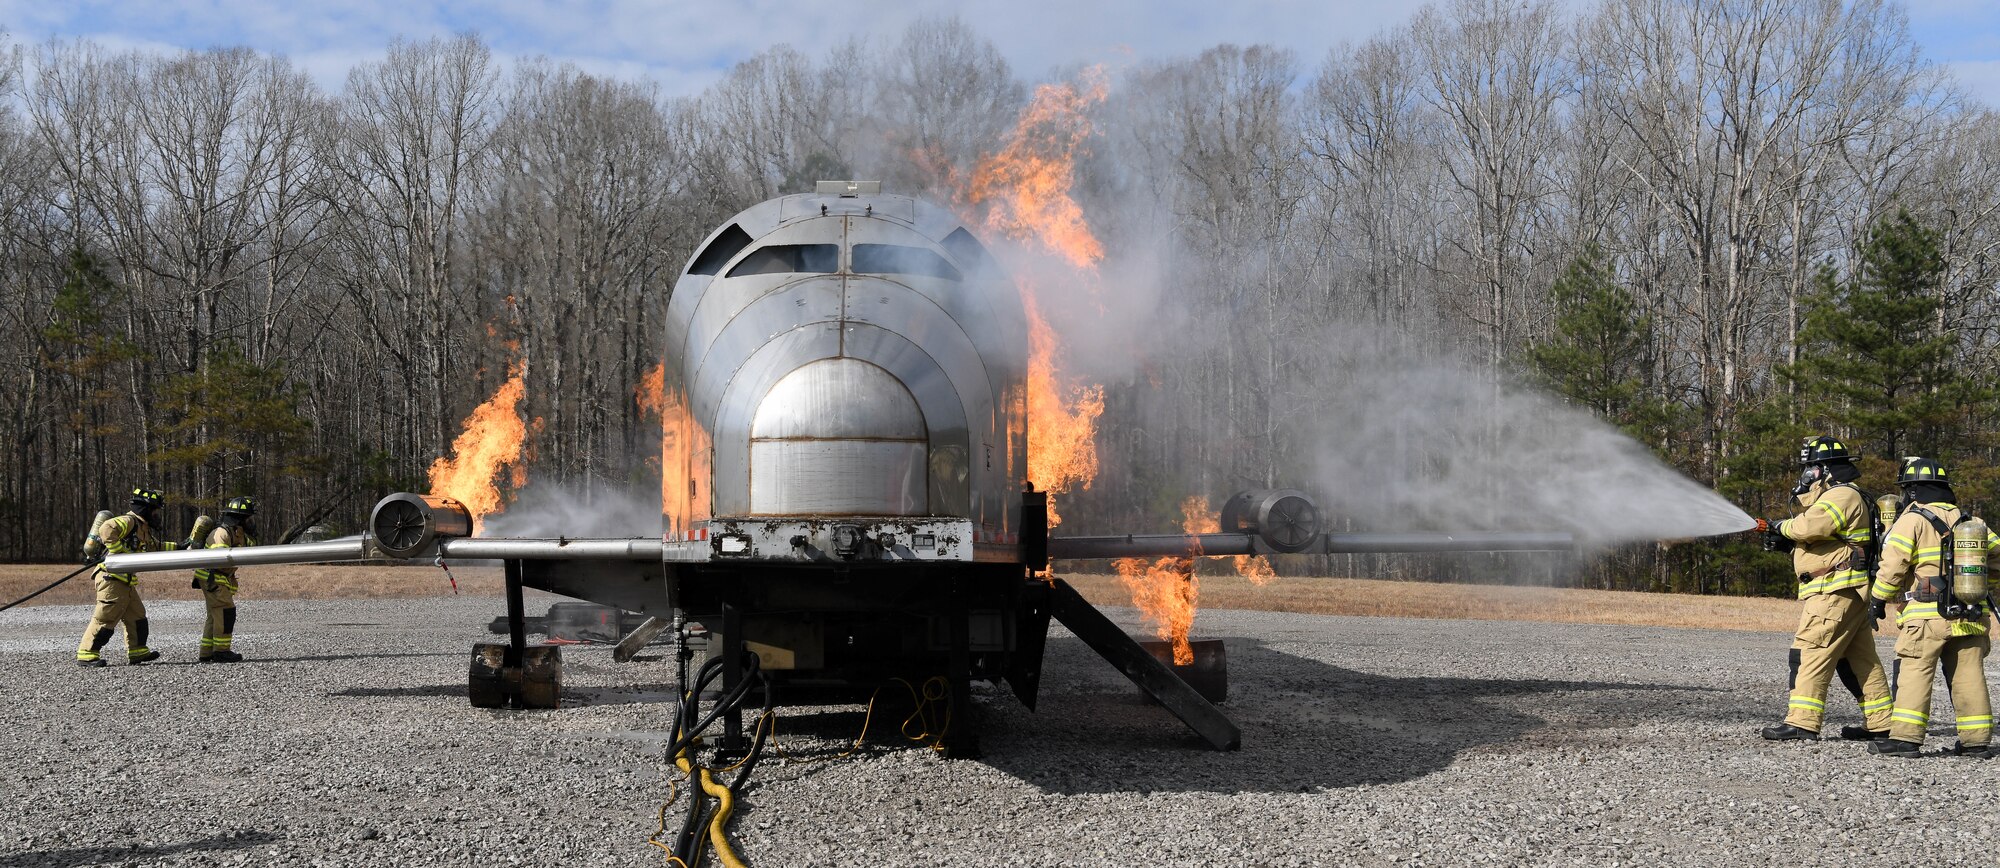 Arnold Air Force Base Fire and Emergency Services crews train Feb. 10, 2021, on aircraft rescue and firefighting techniques using a propane-fueled trainer brought to the base. (U.S. Air Force photo by Jill Pickett)